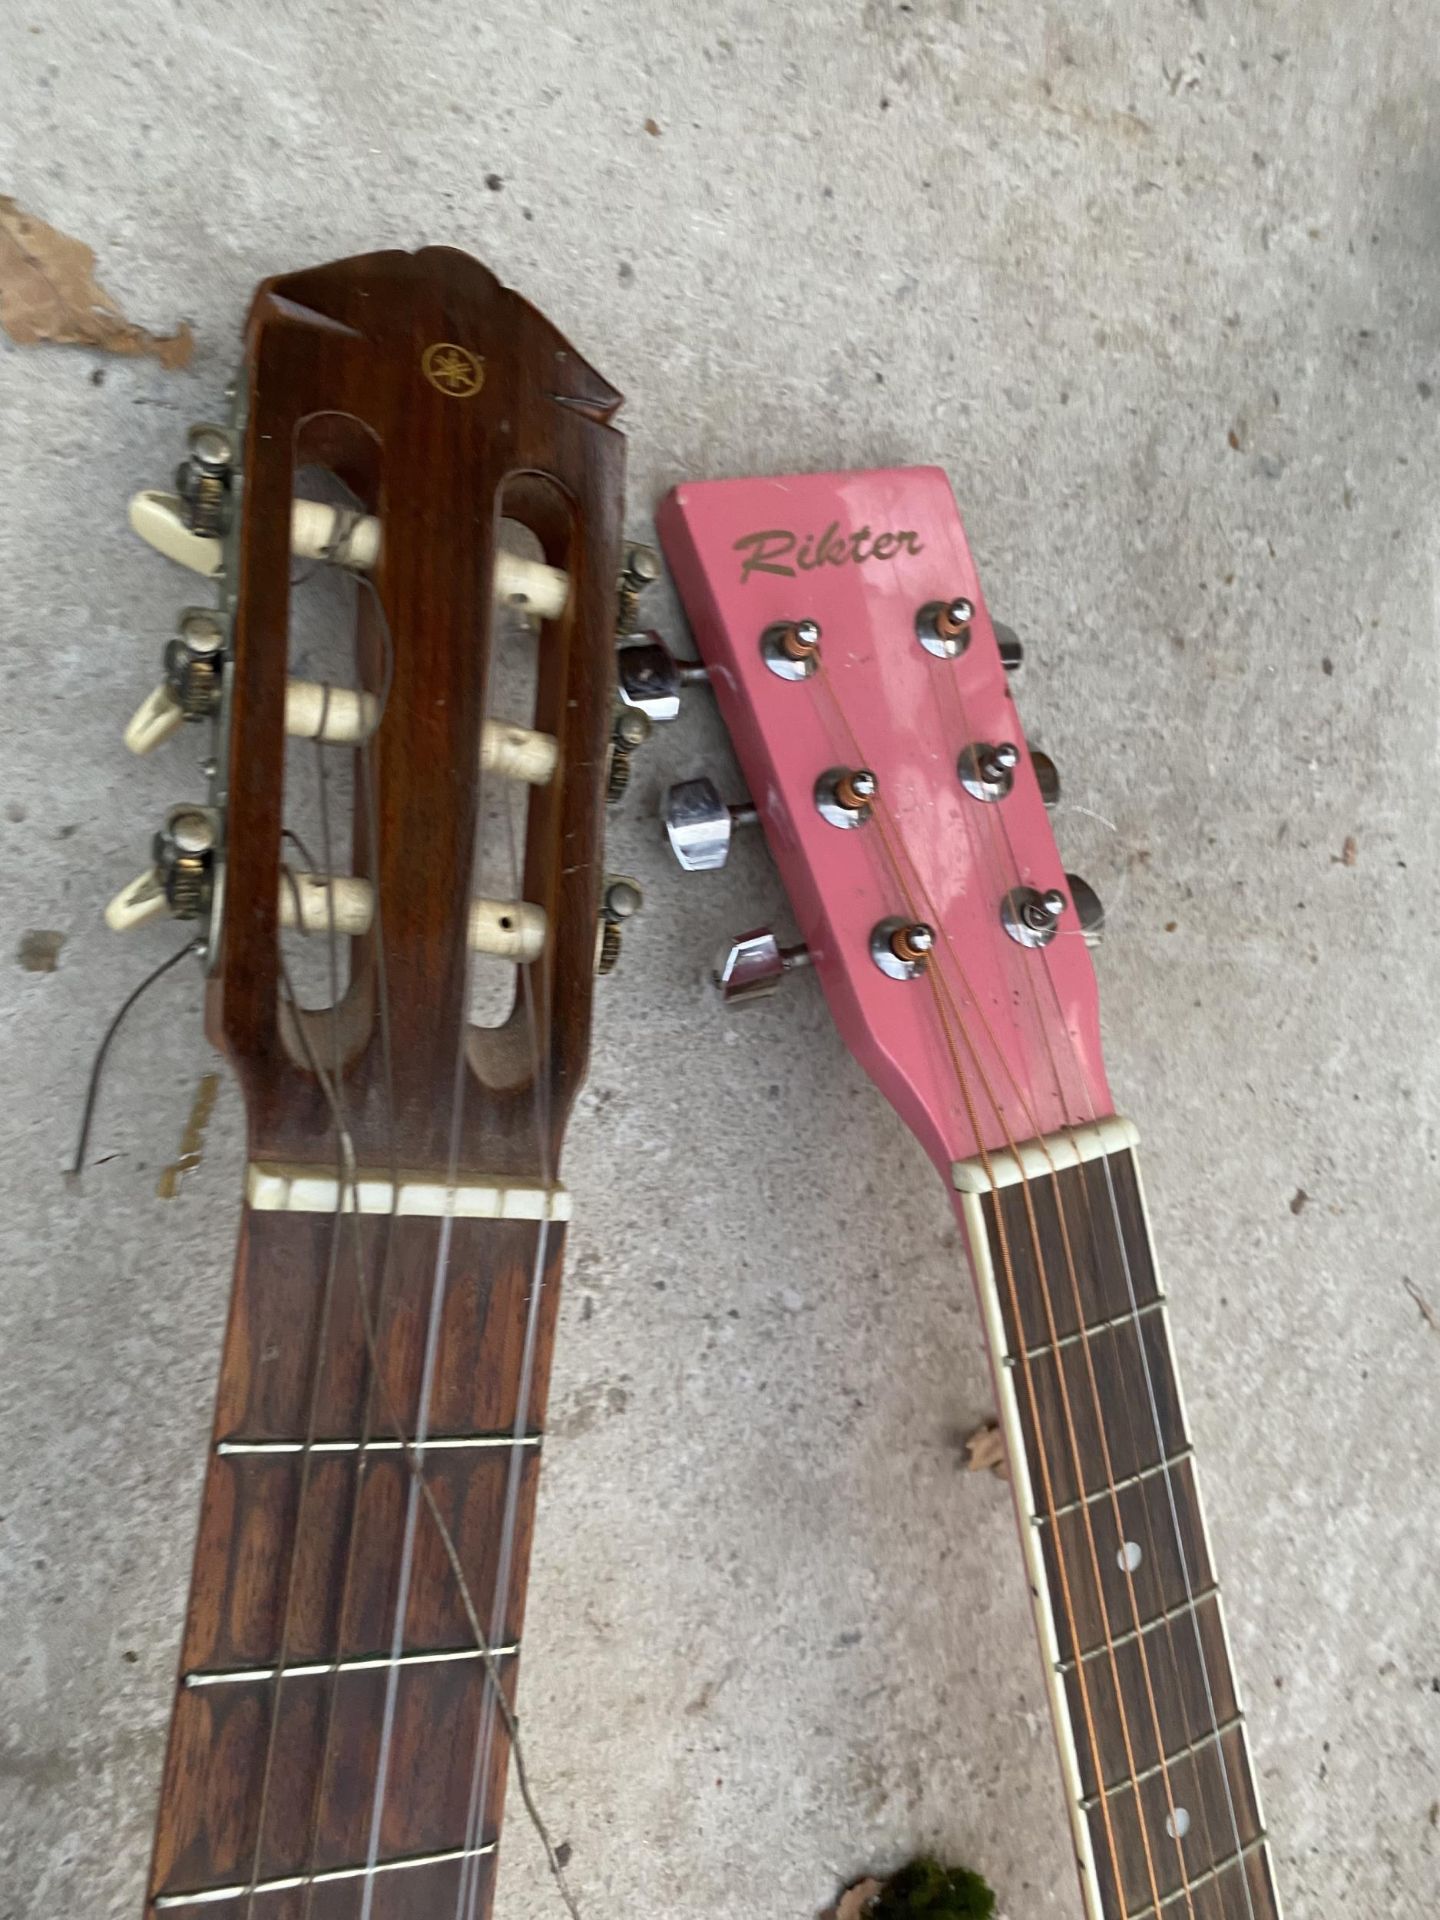 A RIKTER ACOUSTIC GUITAR AND A FURTHER YAMAHA ACOUSTIC GUITAR - Image 3 of 5